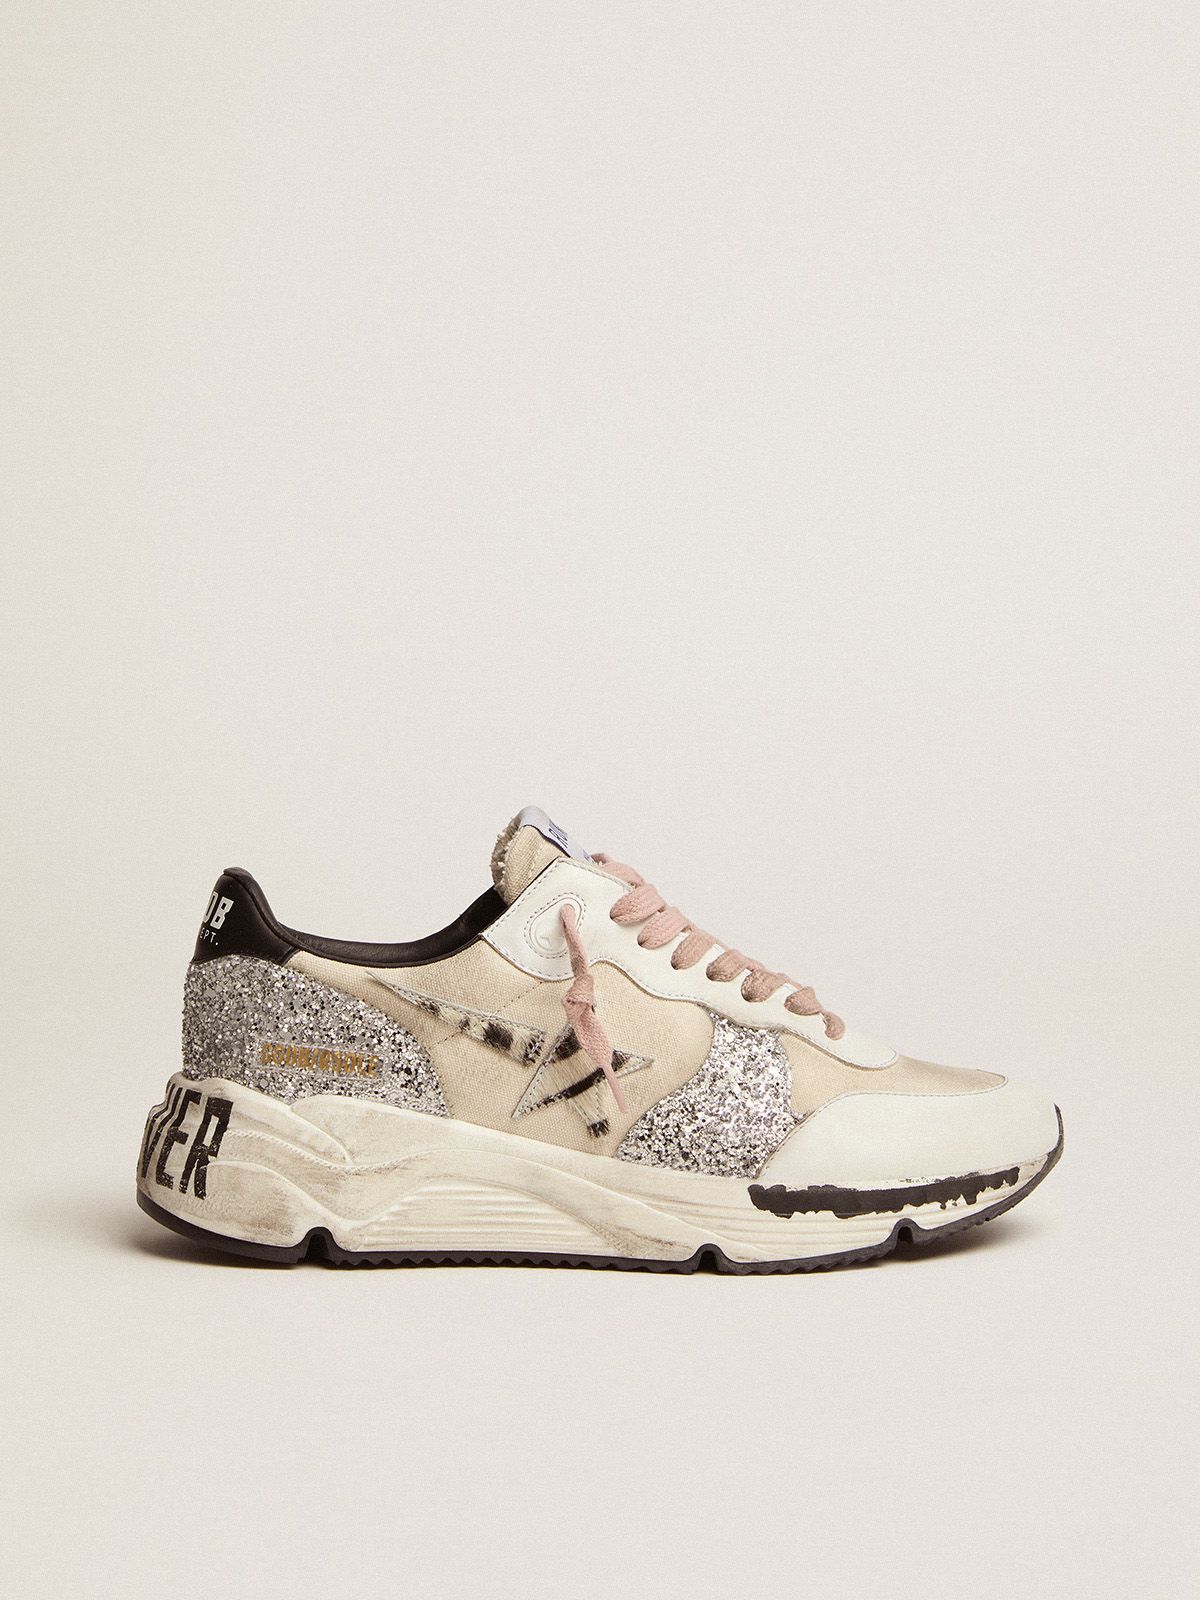 golden goose canvas star zebra-print with cream Sole sneakers pony and Running upper skin